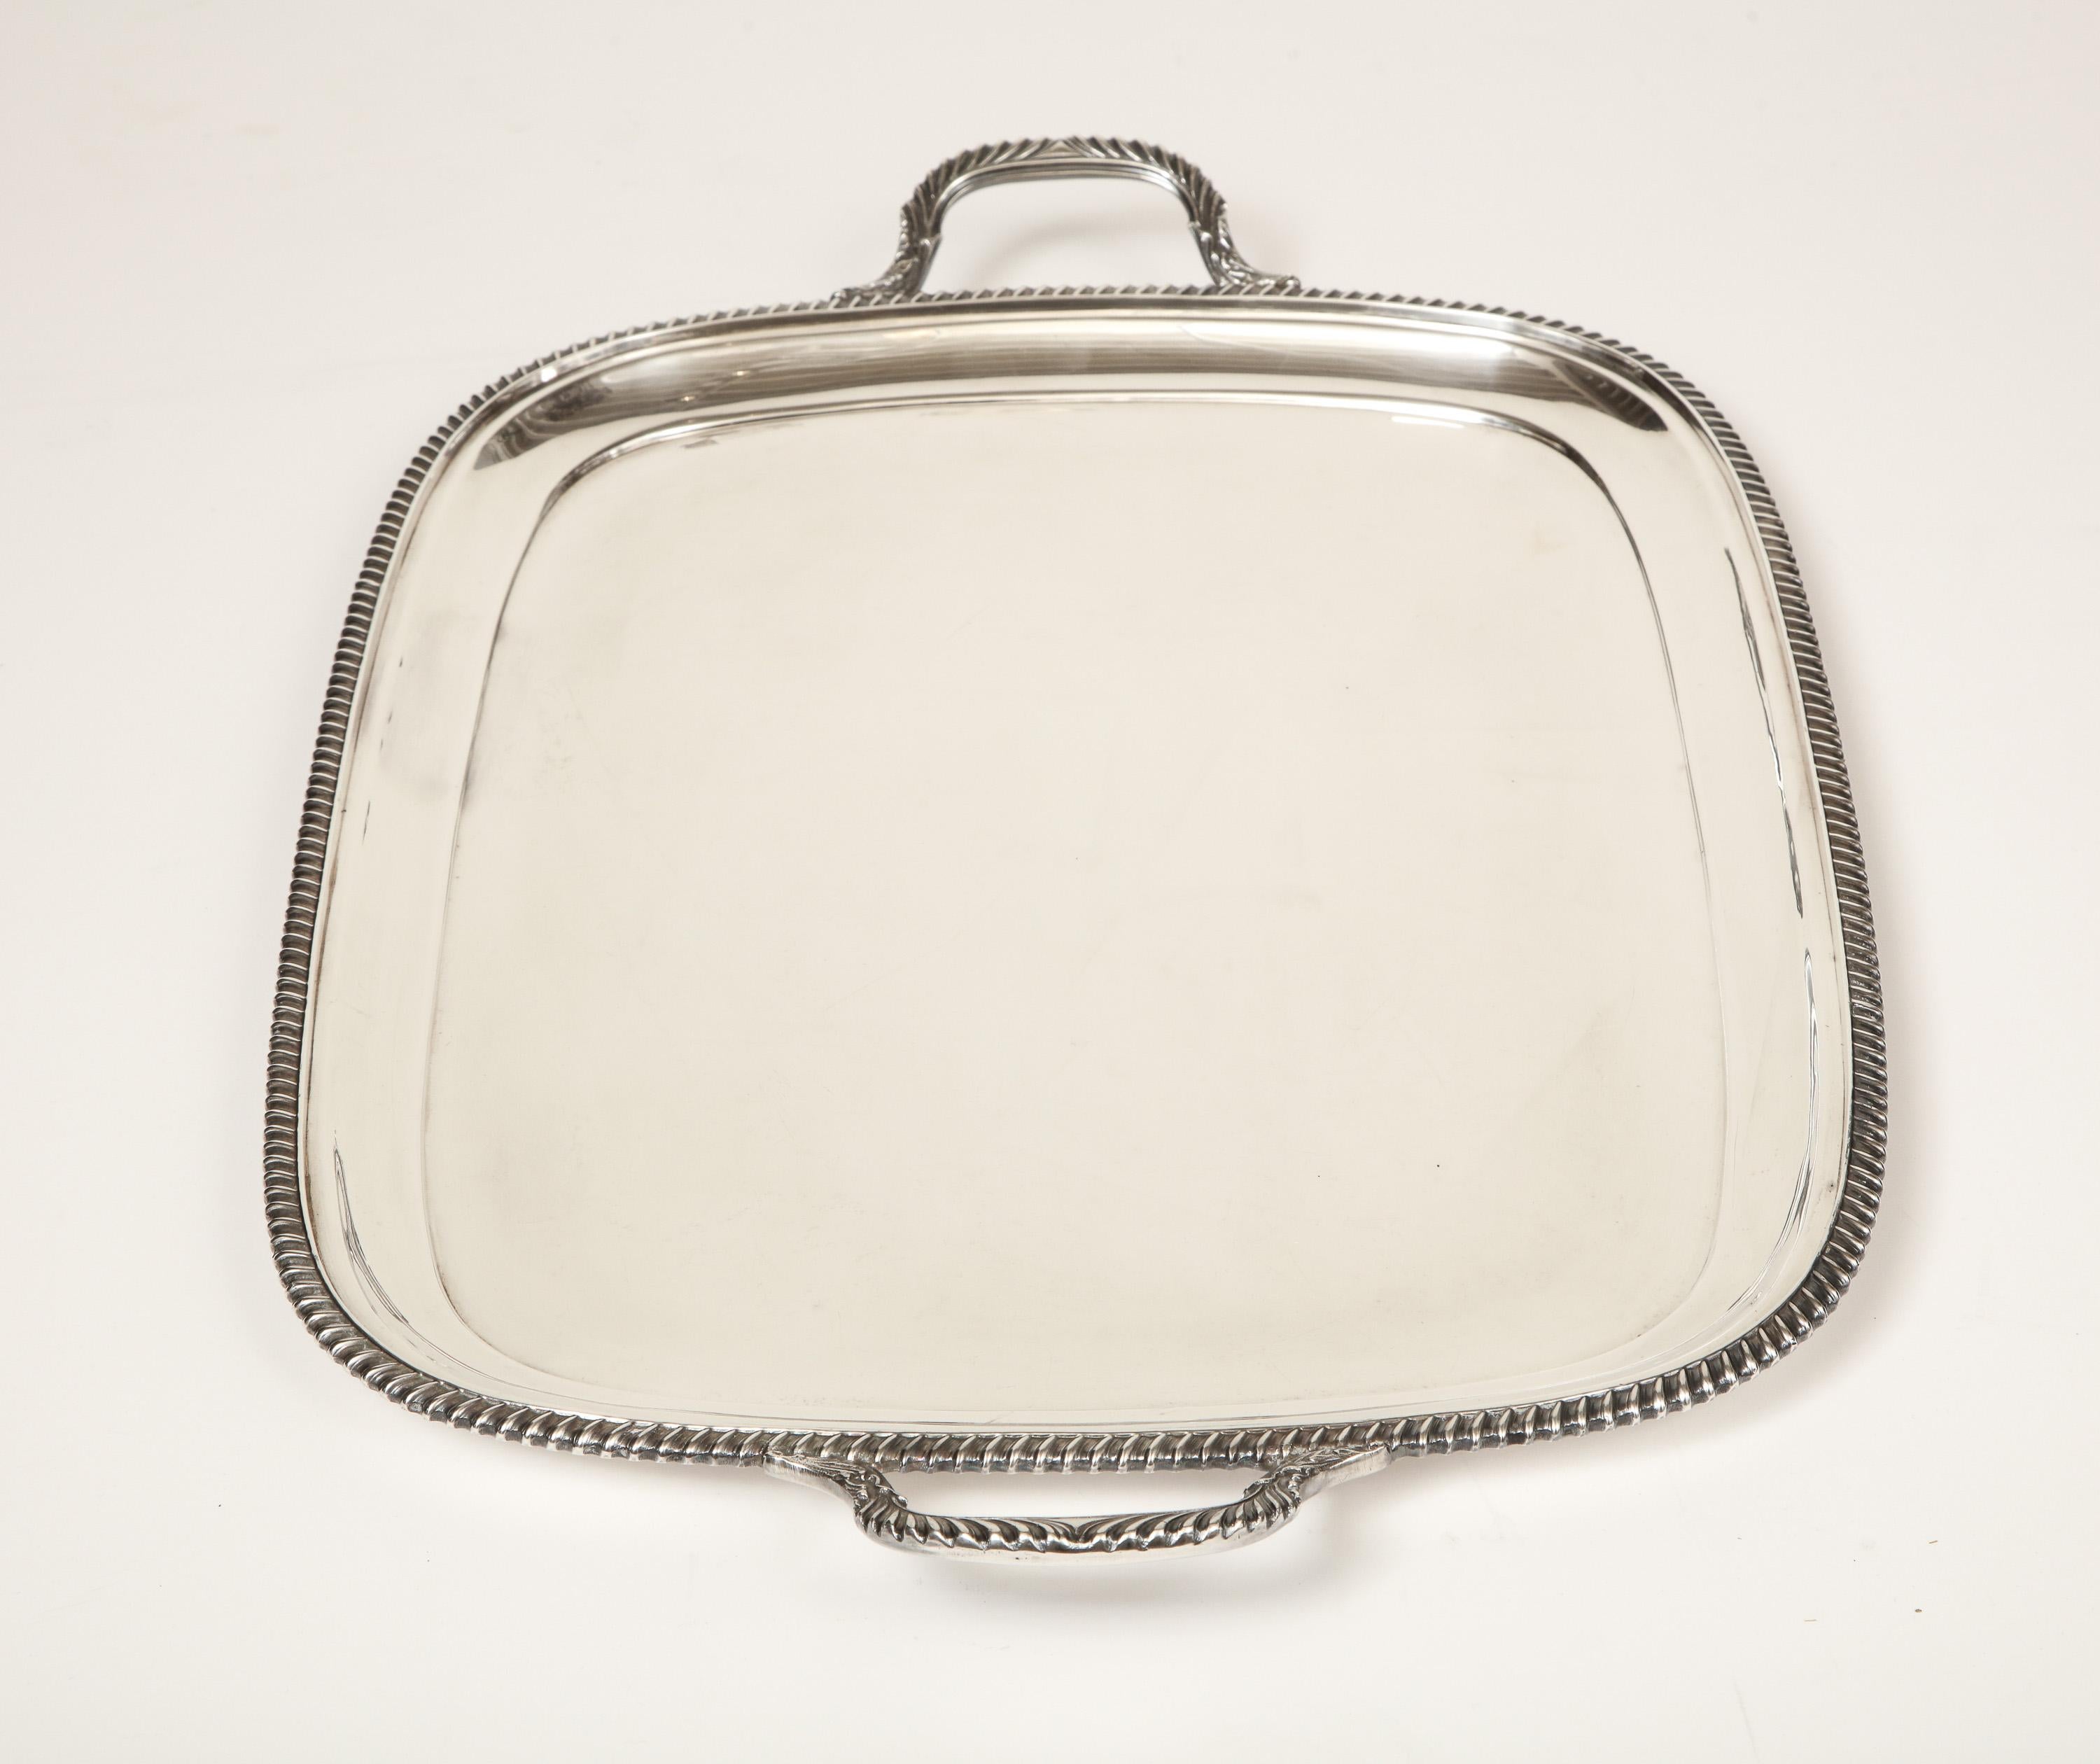 English, Silver Plated Tray 2